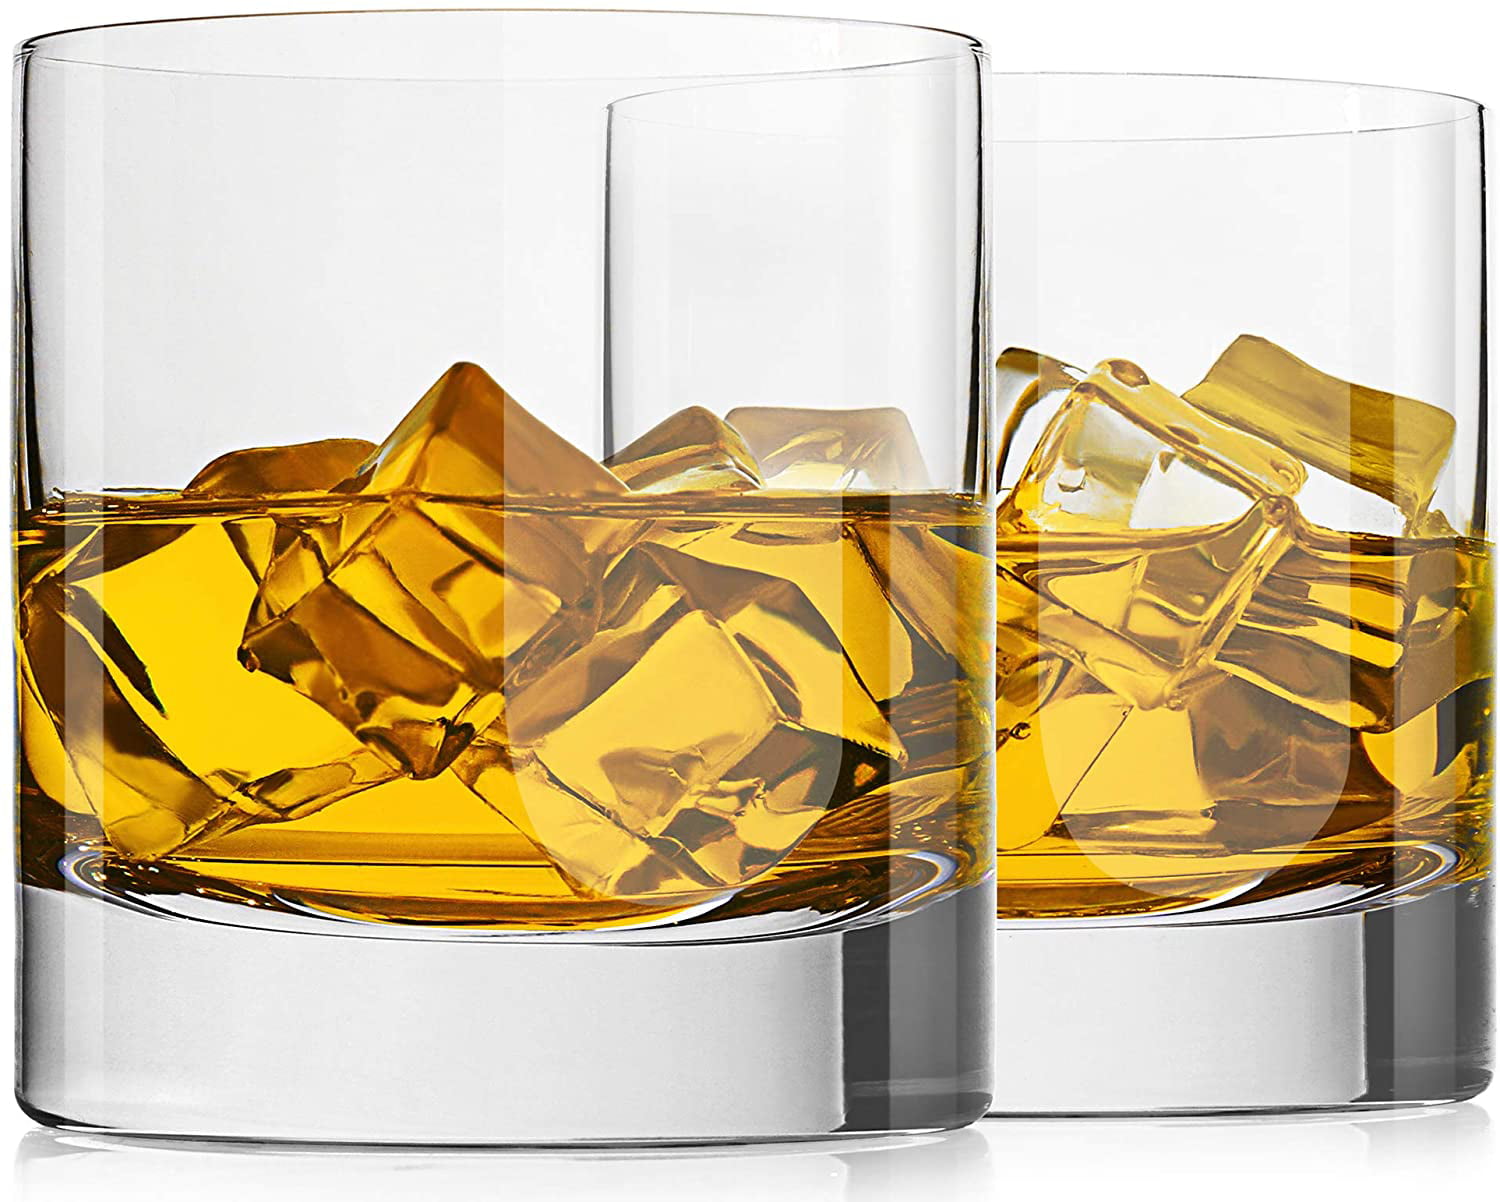 10 oz Protective Box LANFULA Crystal Whiskey Glass Set of 2 Premium Lead Free Crystal Old Fashioned Twist Cocktail Tumblers